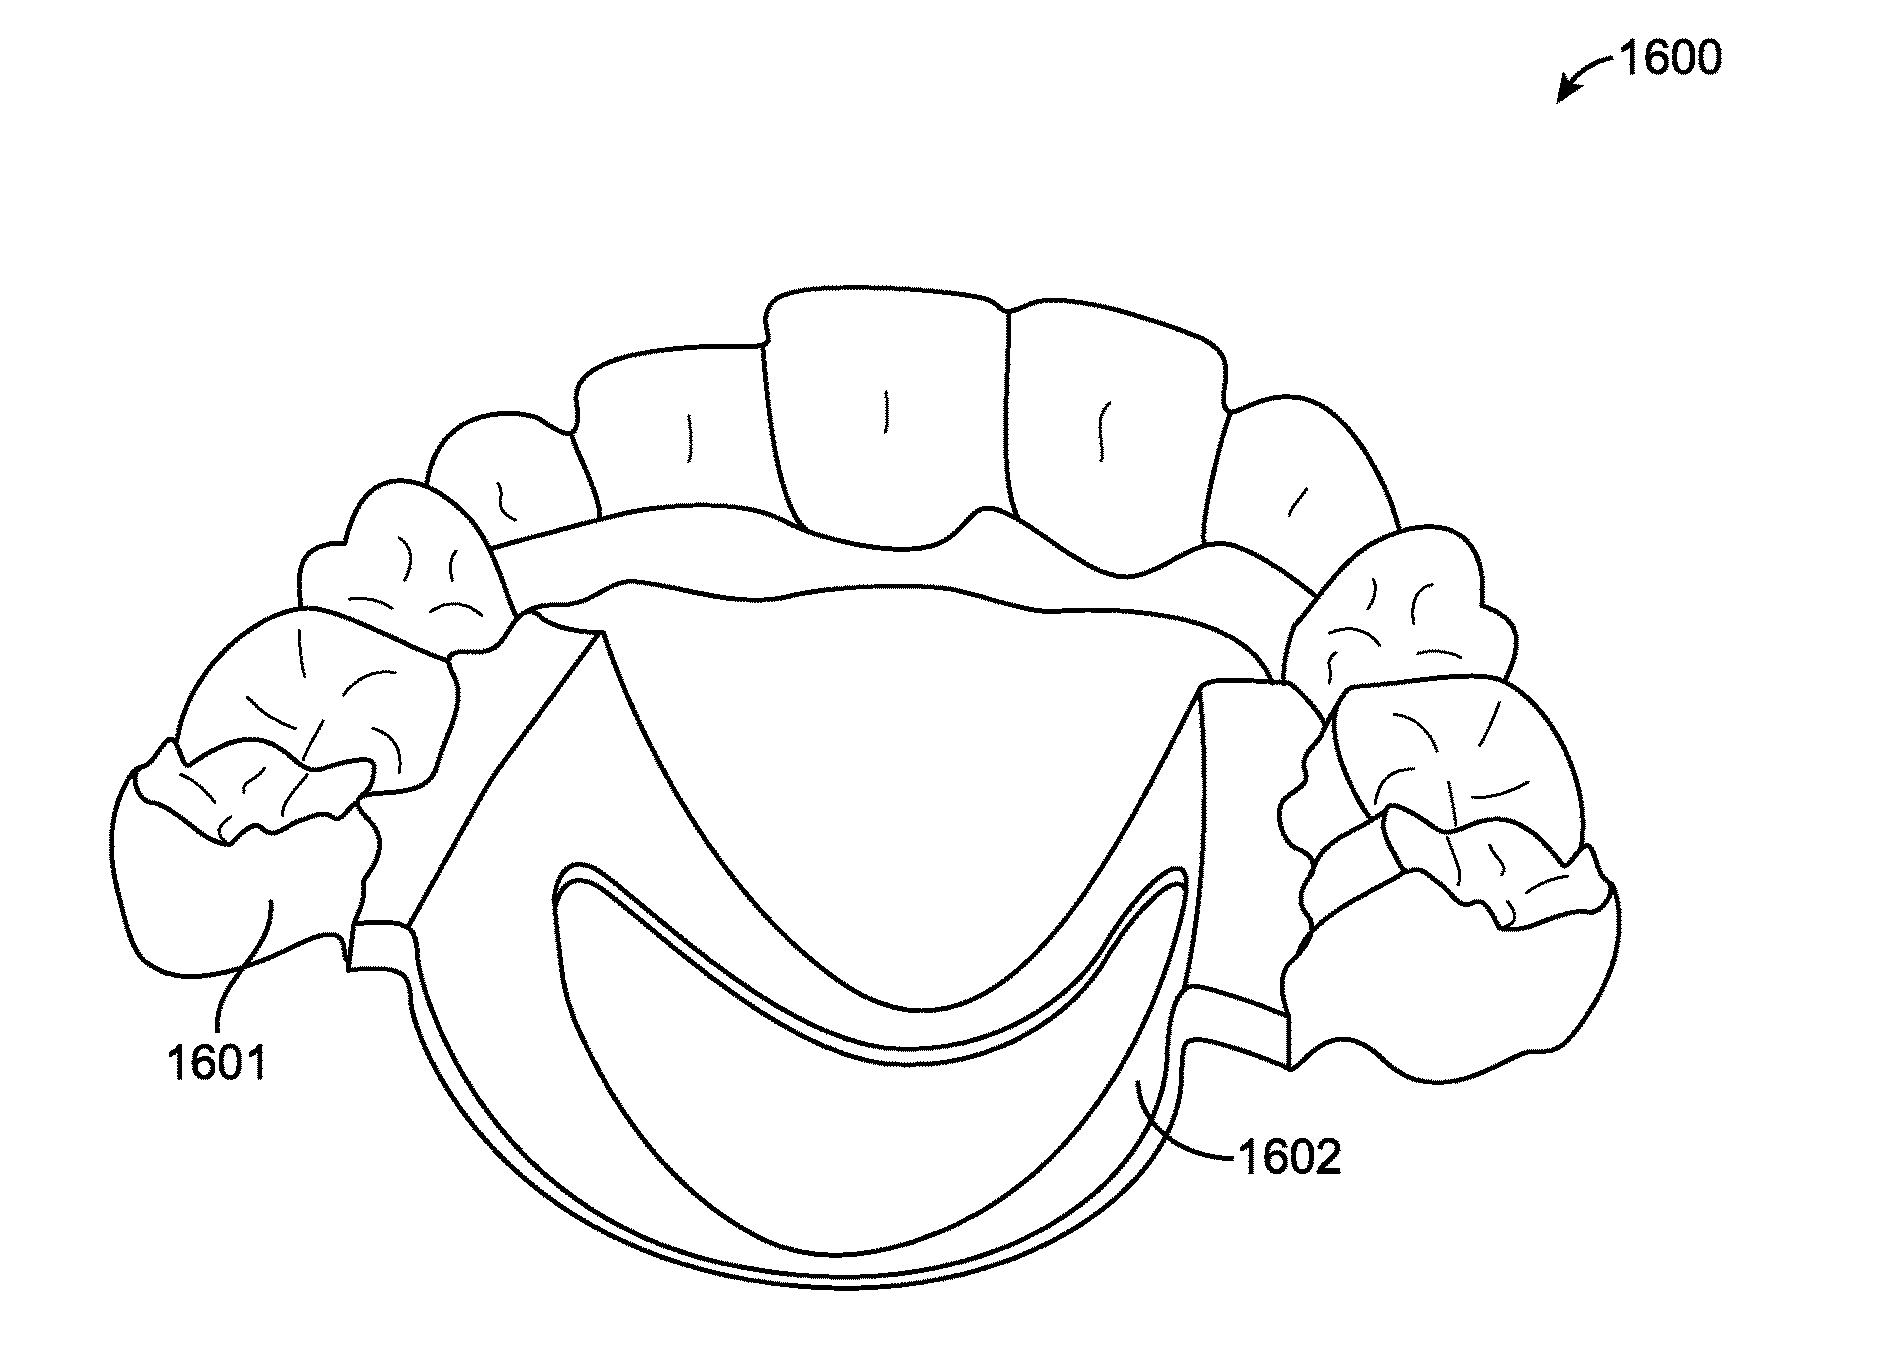 Direct fabrication of aligners for palate expansion and other applications